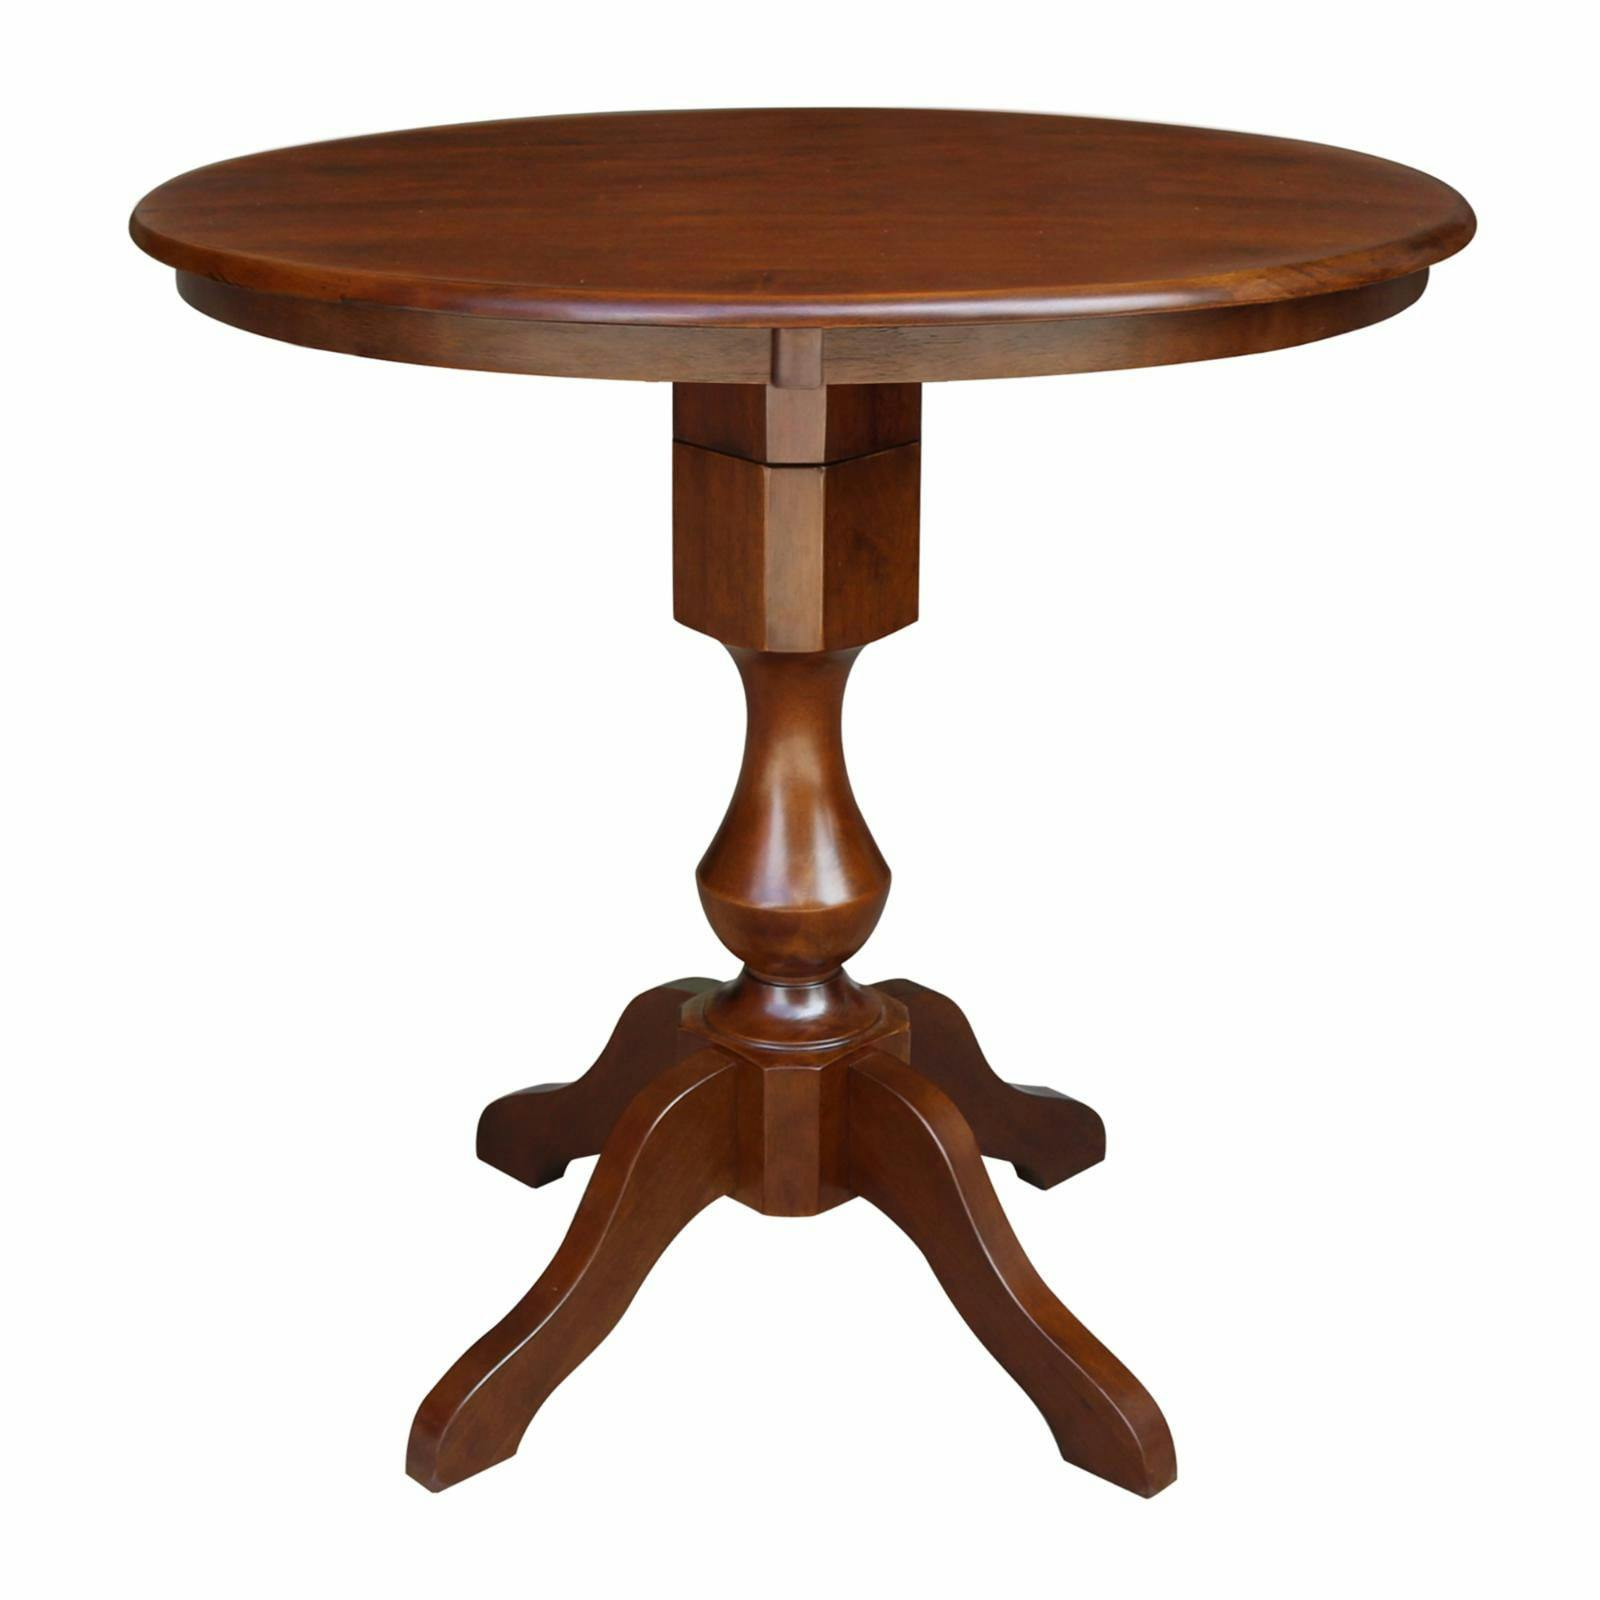 Chateau Espresso 38" Round Wood Extendable Counter Table